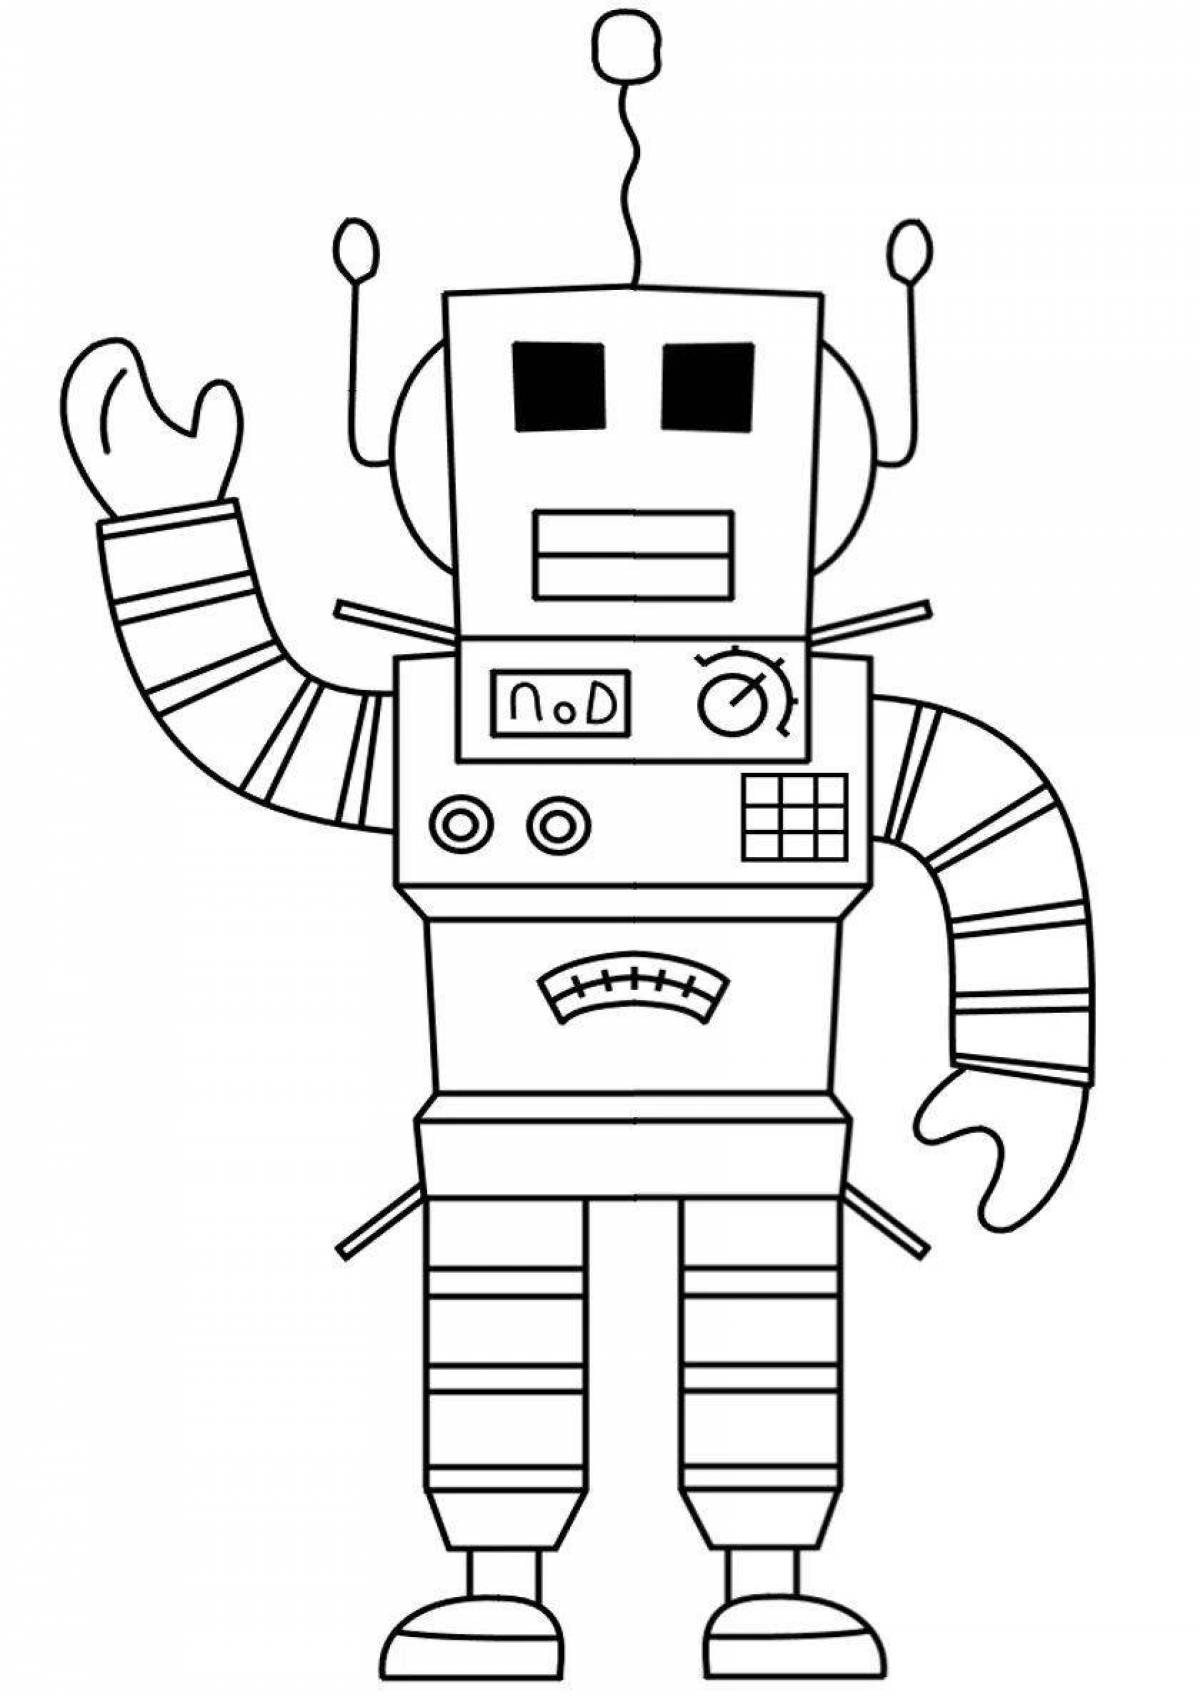 Robloxers animated coloring pages